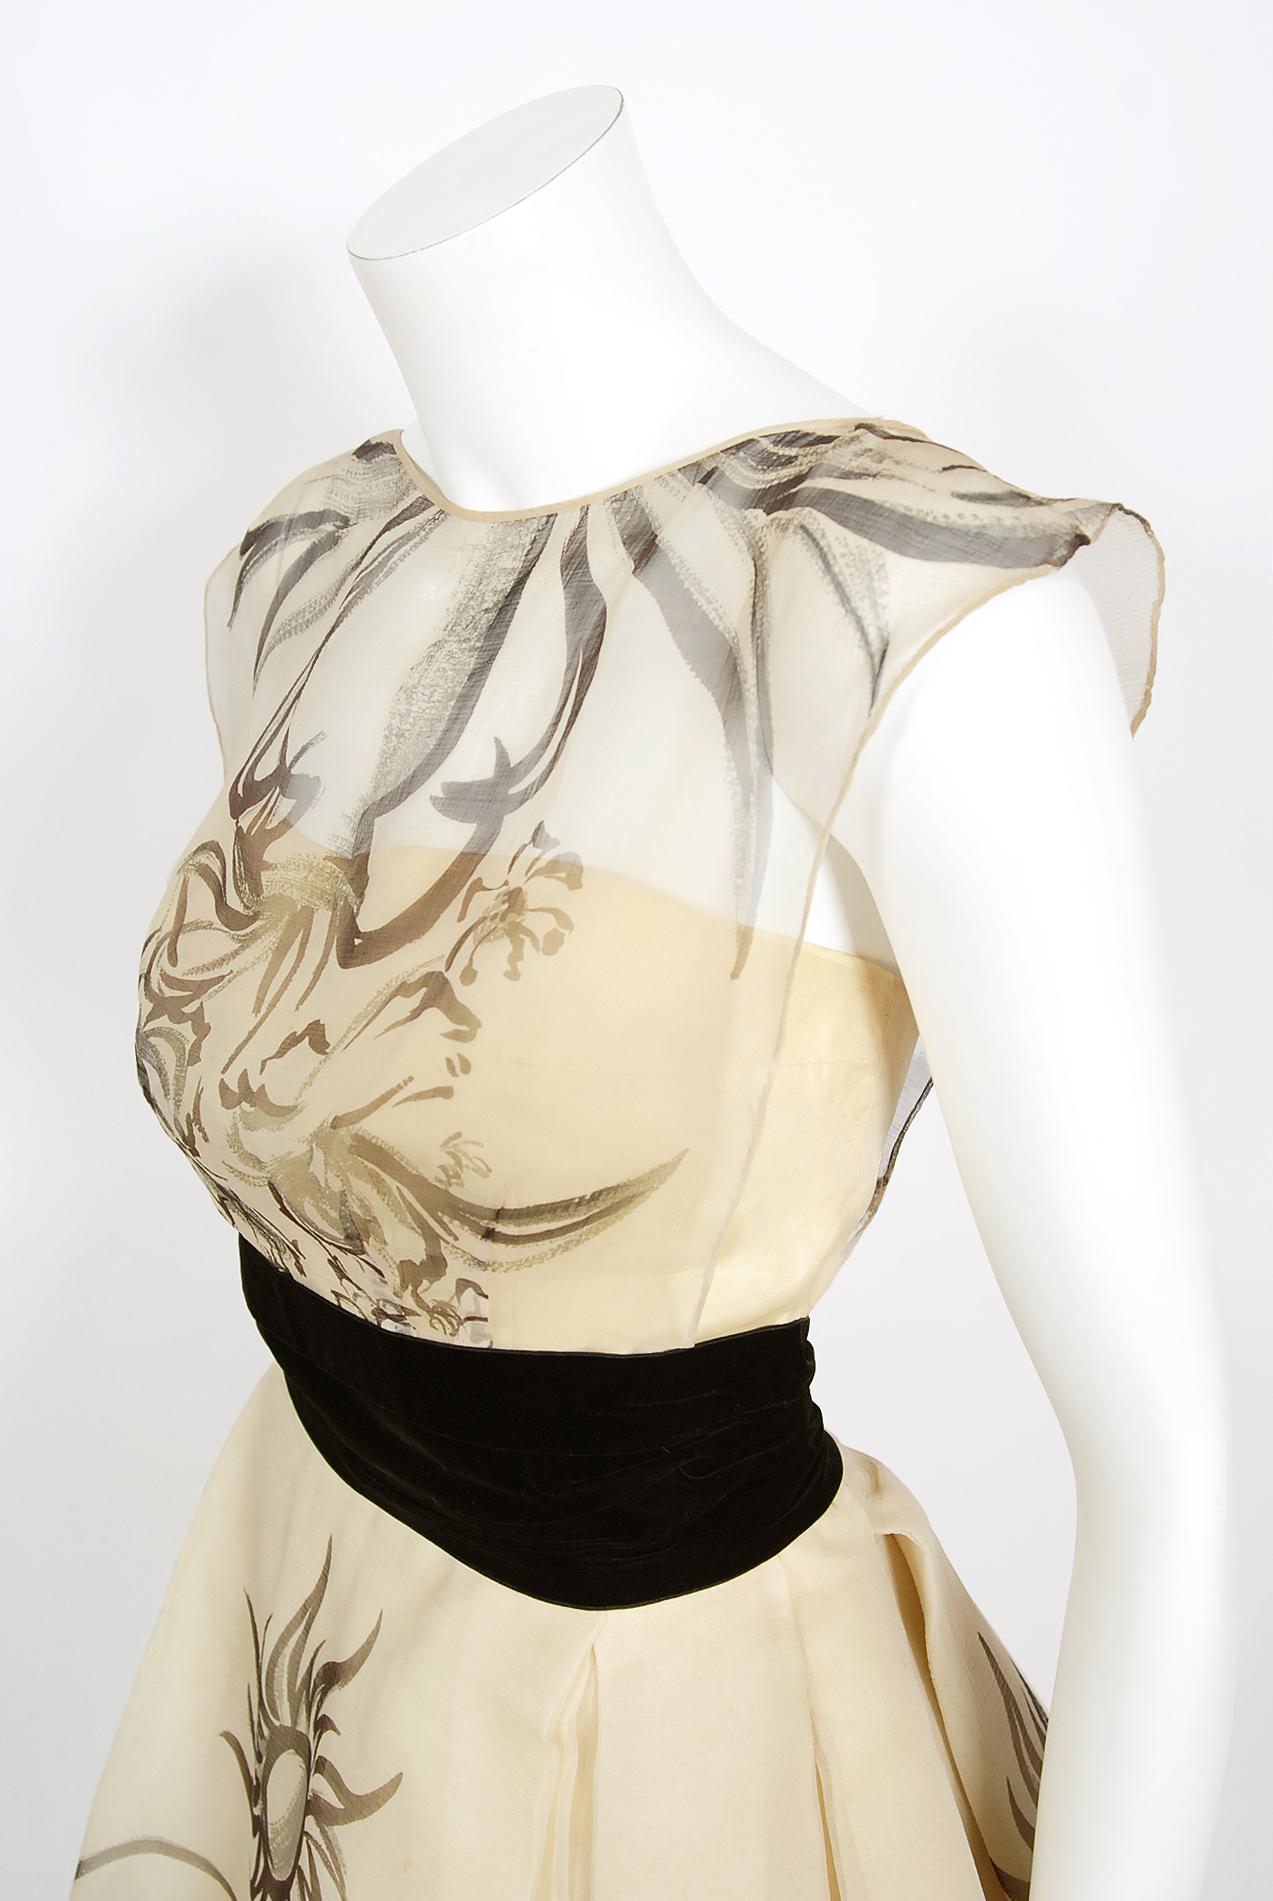 Vintage 1950's Hattie Carnegie Couture Whimsical Hand-Painted Cream Silk Gown  5